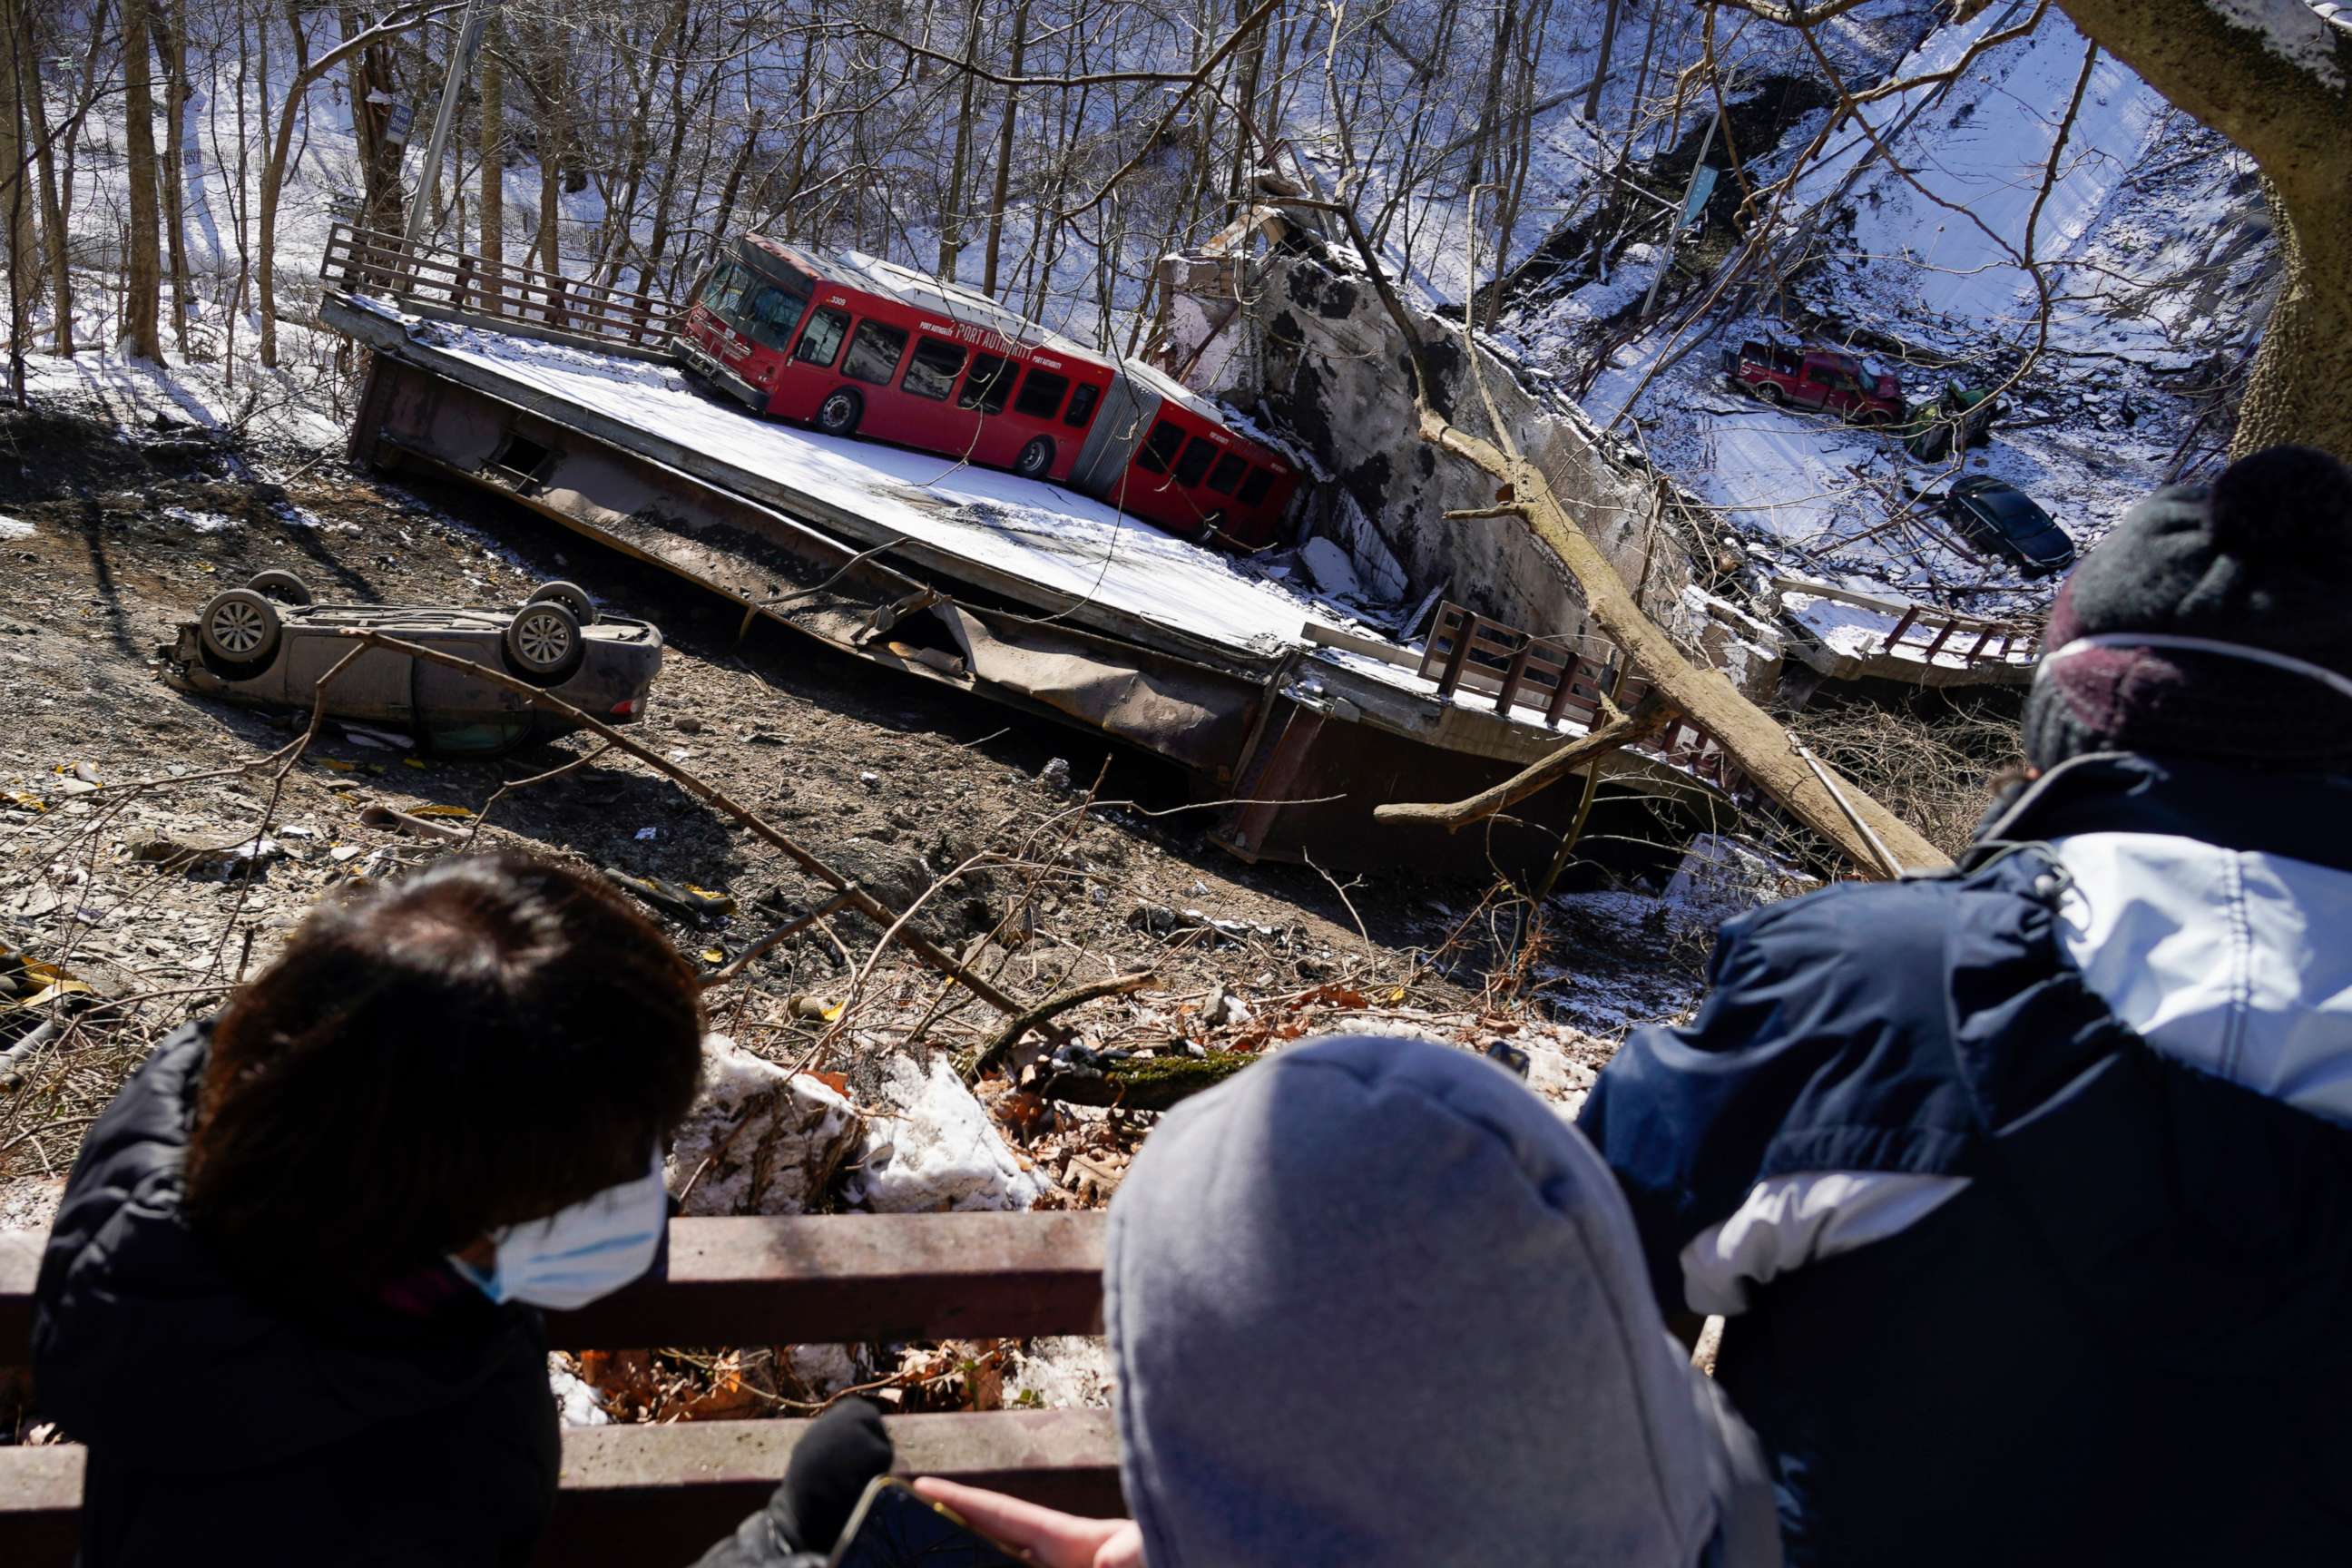 PHOTO: Onlookers look at the bus and vehicles below after Friday's bridge collapse Saturday, Jan. 29, 2022, in Pittsburgh.